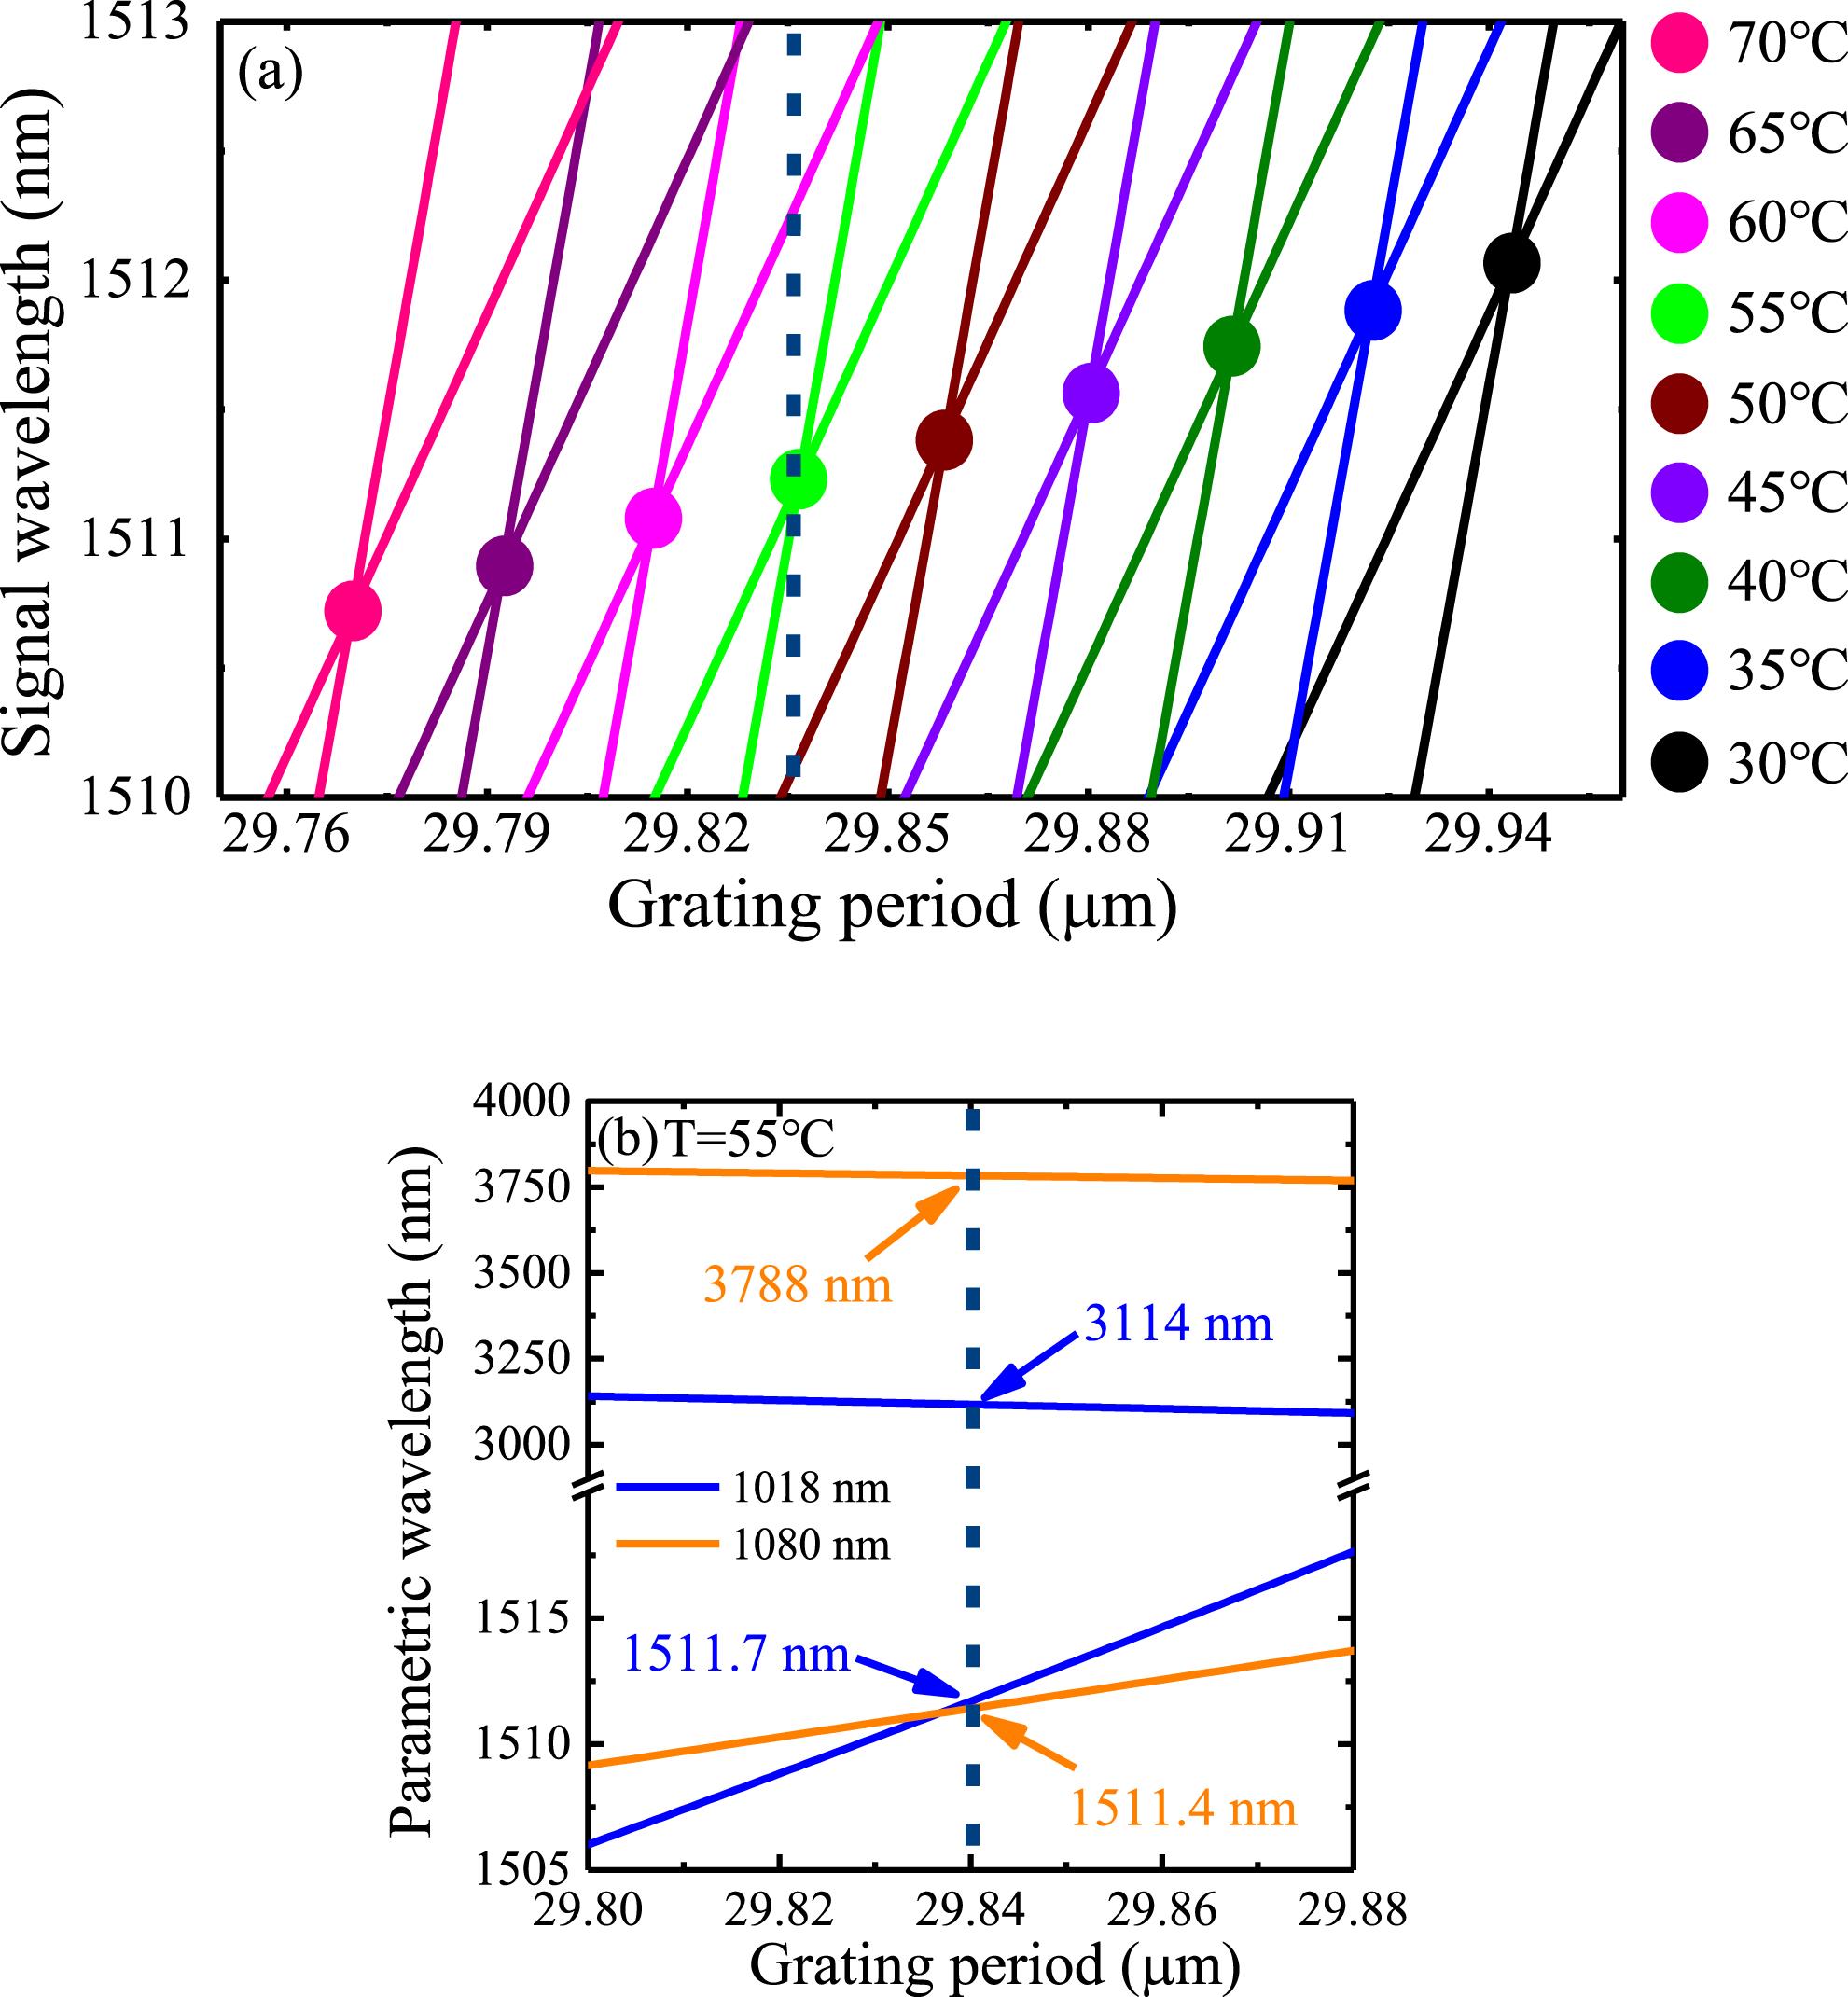 (a) Simulated signal wavelength versus grating period at different crystal temperatures. (b) Simulated tuning curves for $55\,^{\circ }\text{C}$ with $1018~\text{nm}/1080~\text{nm}$ pumping.